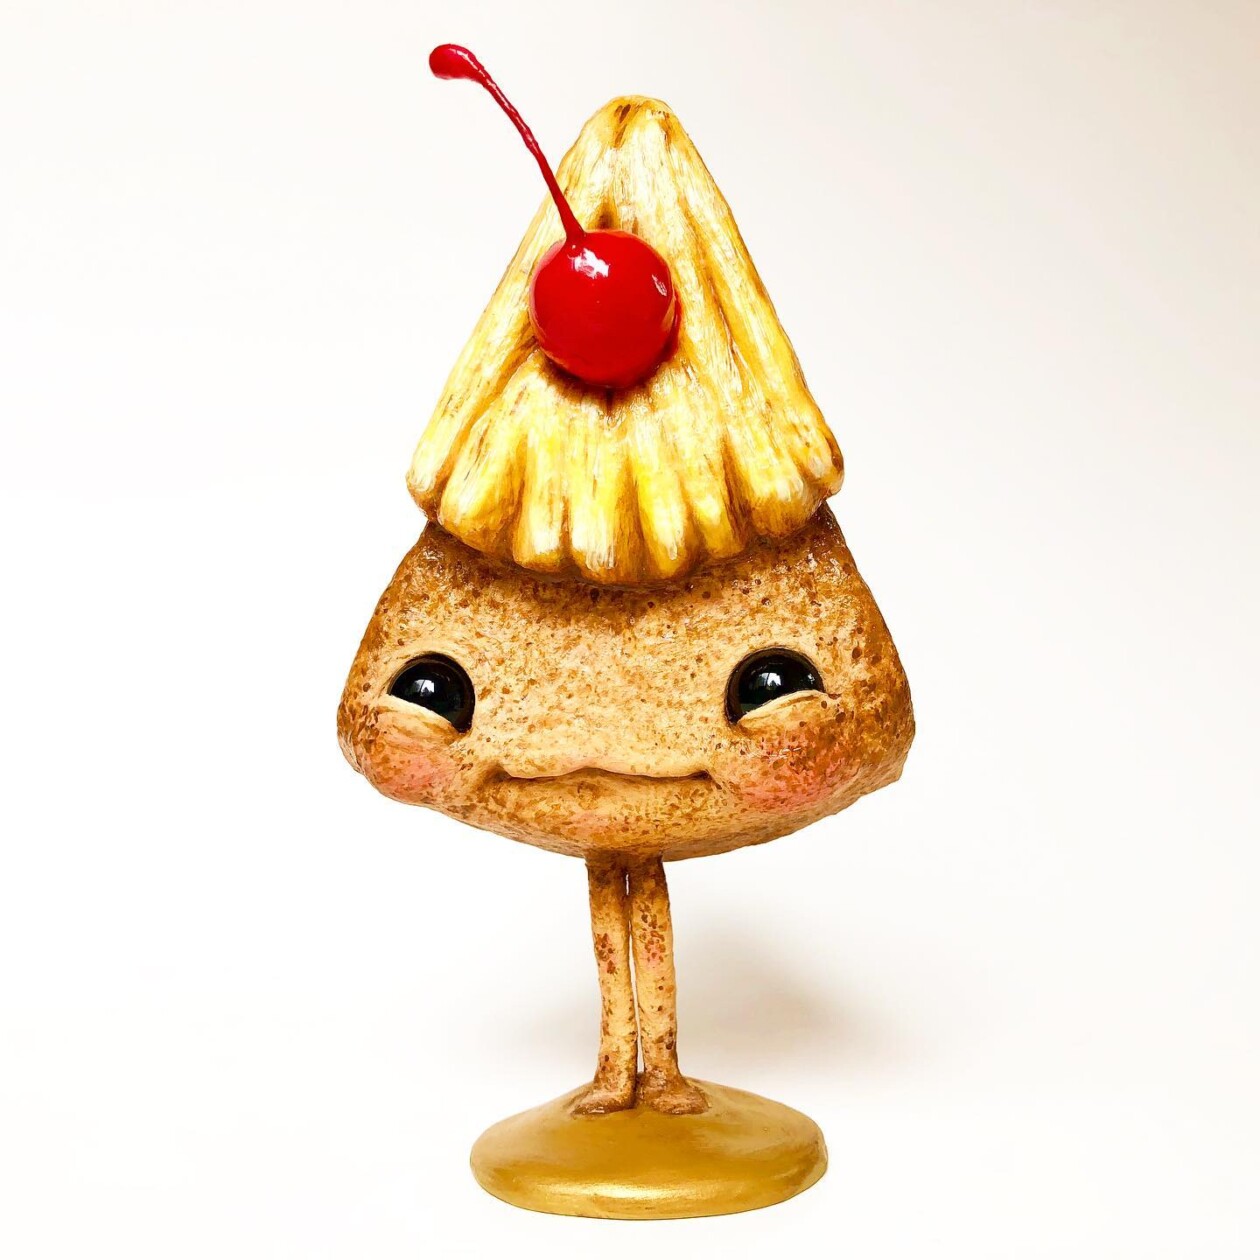 Cute And Creepy Little Monster Toys By Sara Duarte (5)